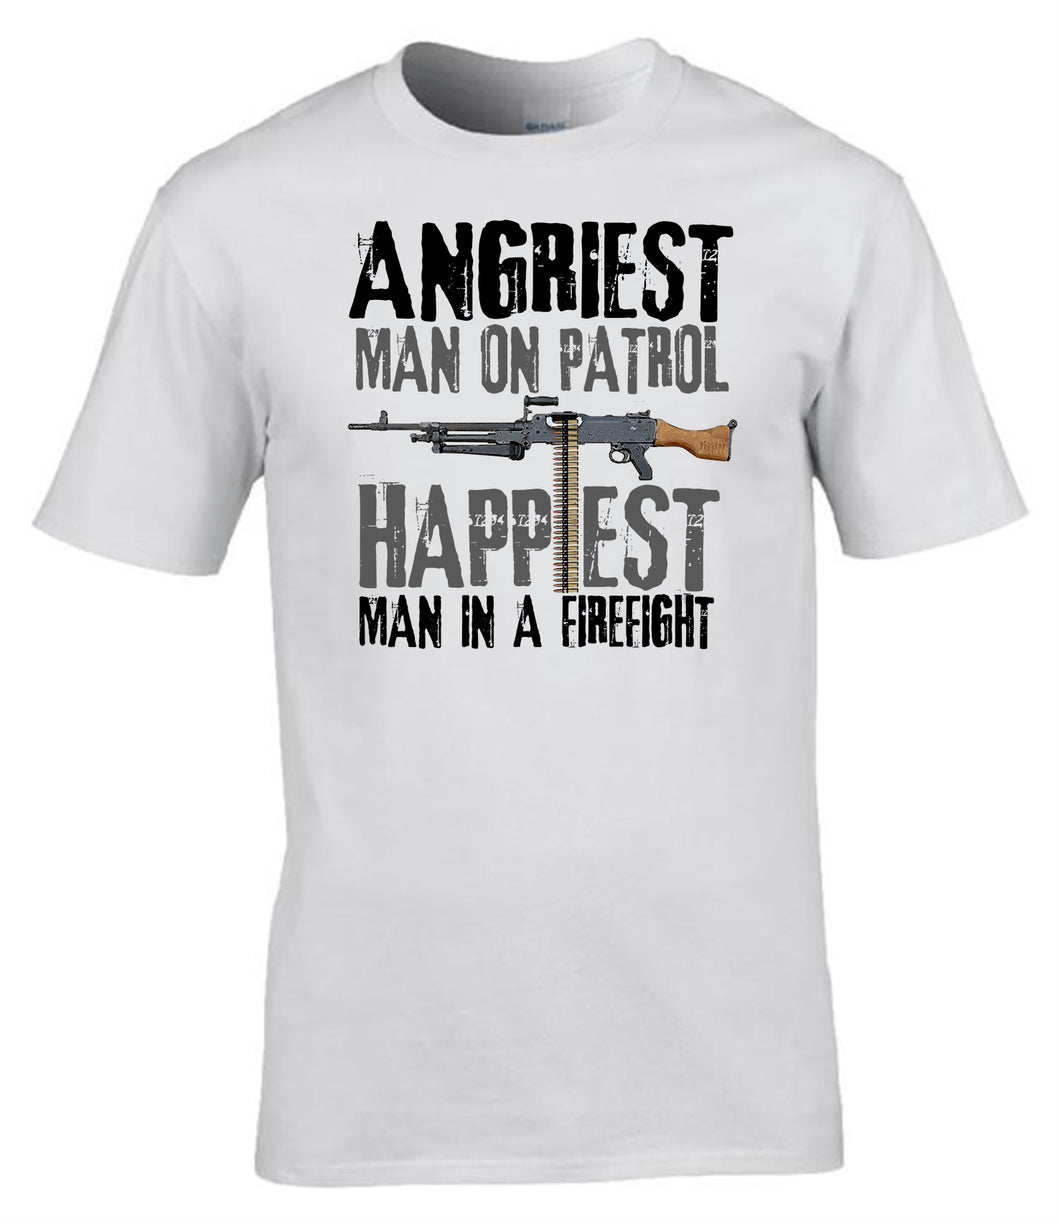 British Military Gifts - Angriest Man - On Patrol - Gifts For Him - Army Gifts - Veterans Gifts - T-Shirt